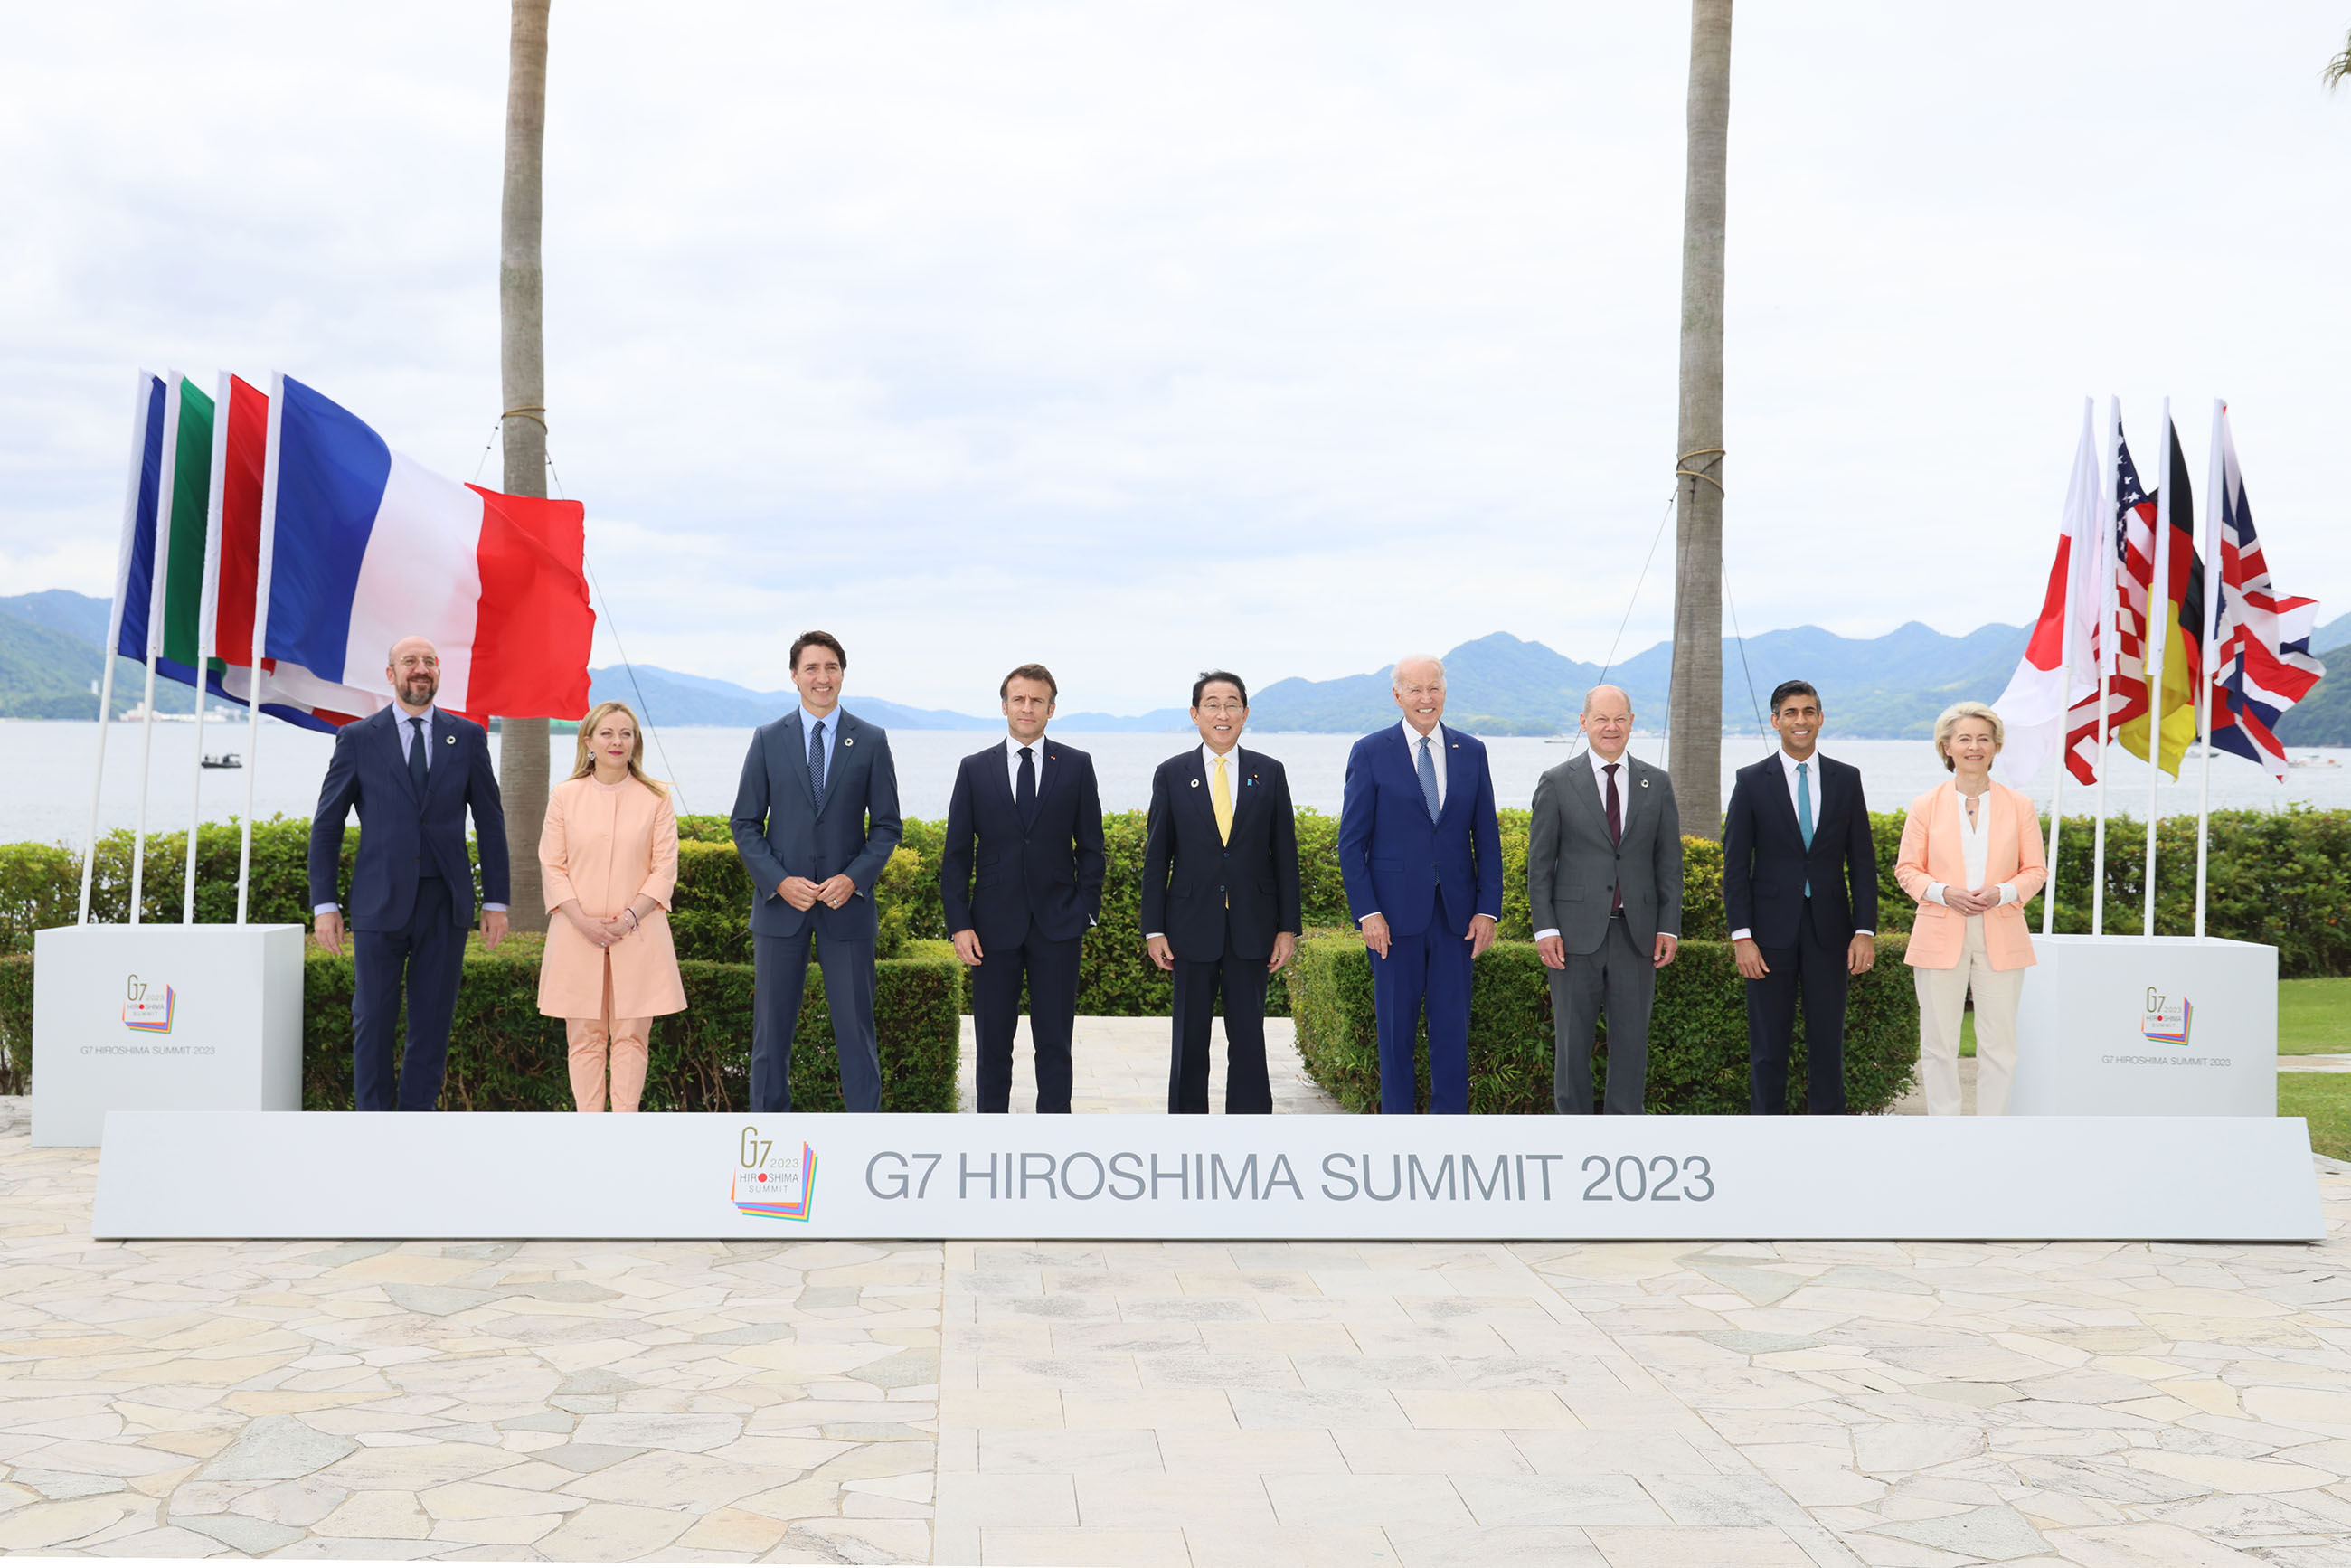 G7 Hiroshima Summit (Second Day): Session 4, Photo Session, Session 5